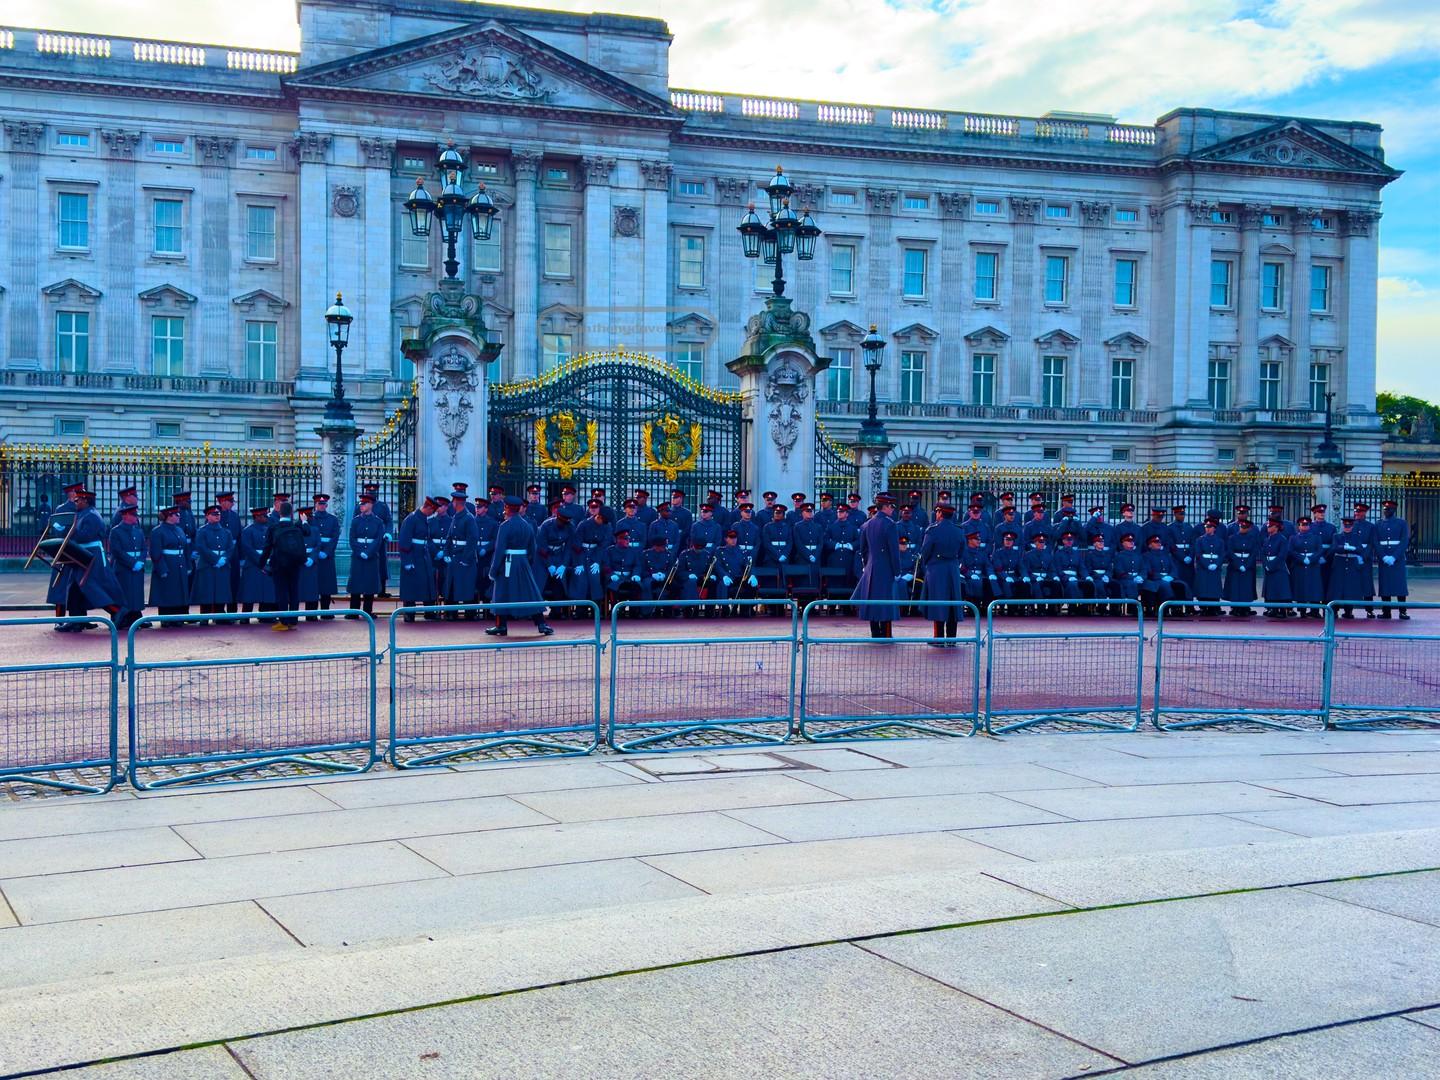 Standing_in_the_shadow_of_regal_history_at_Buckingham_Palace__An_iconic_landmark_that_never_fails_to_inspire_awe_and_adjpg